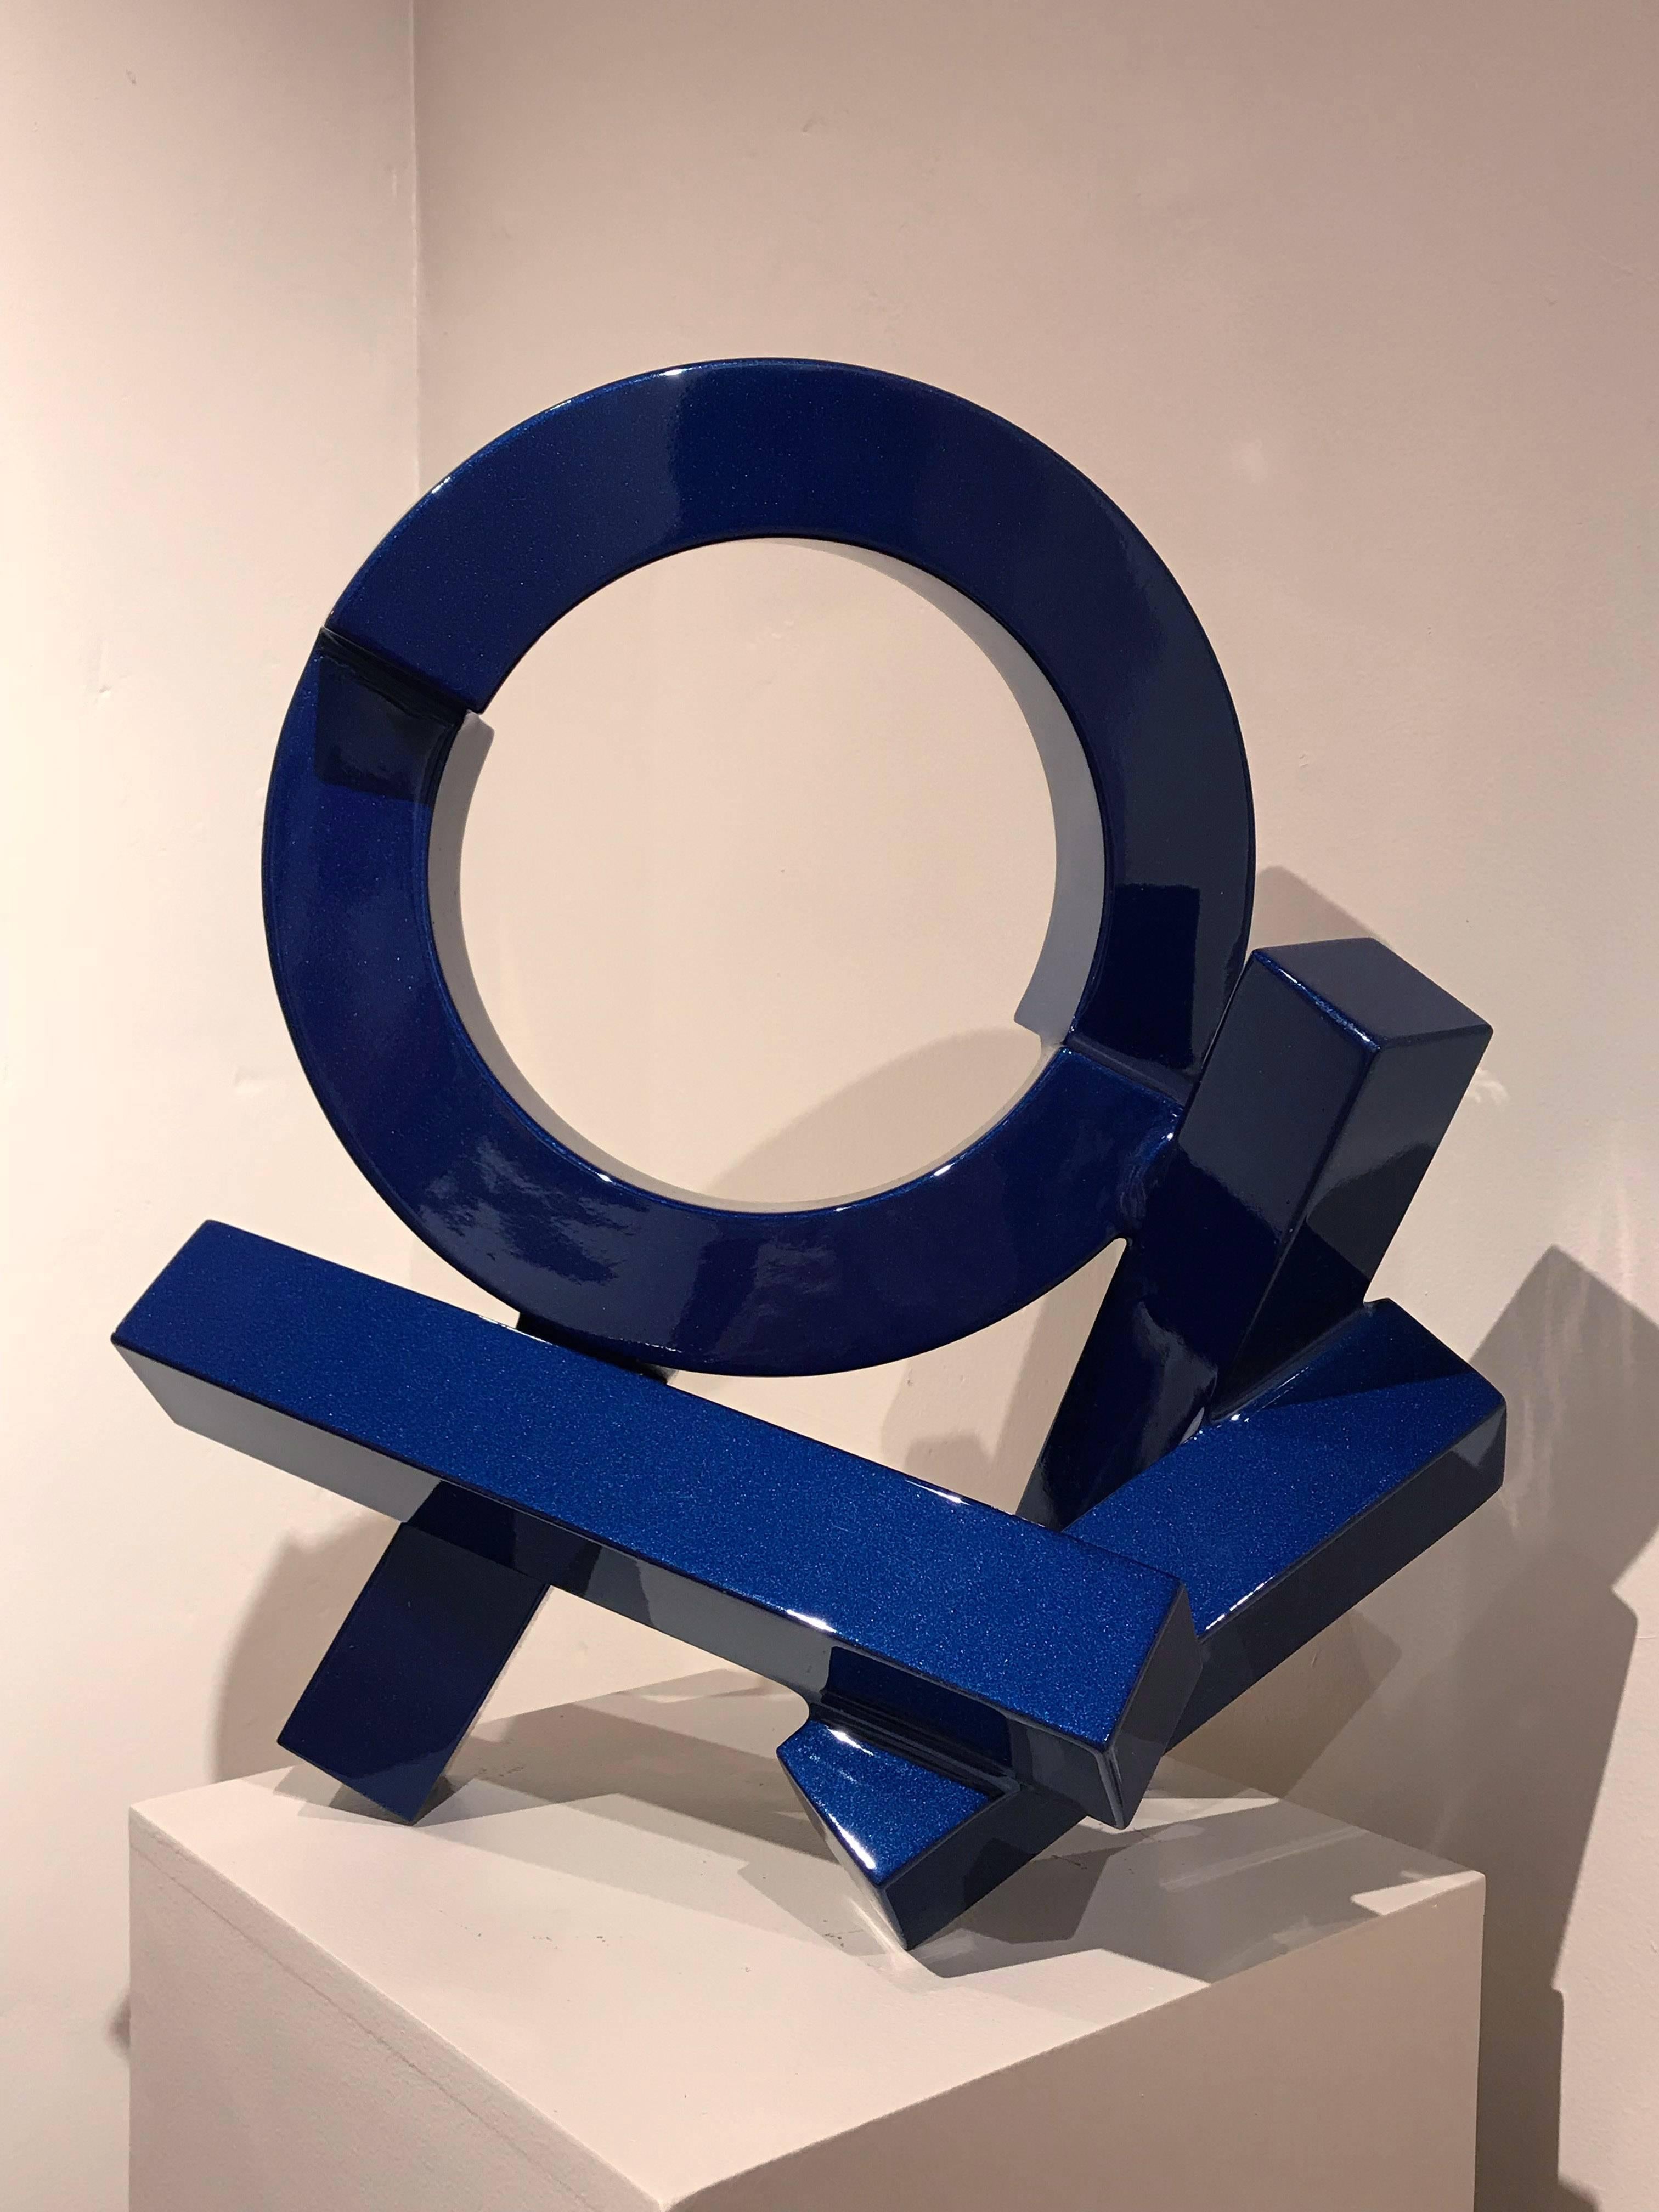 Rob Lorenson Abstract Sculpture - Blue Quadrilateral